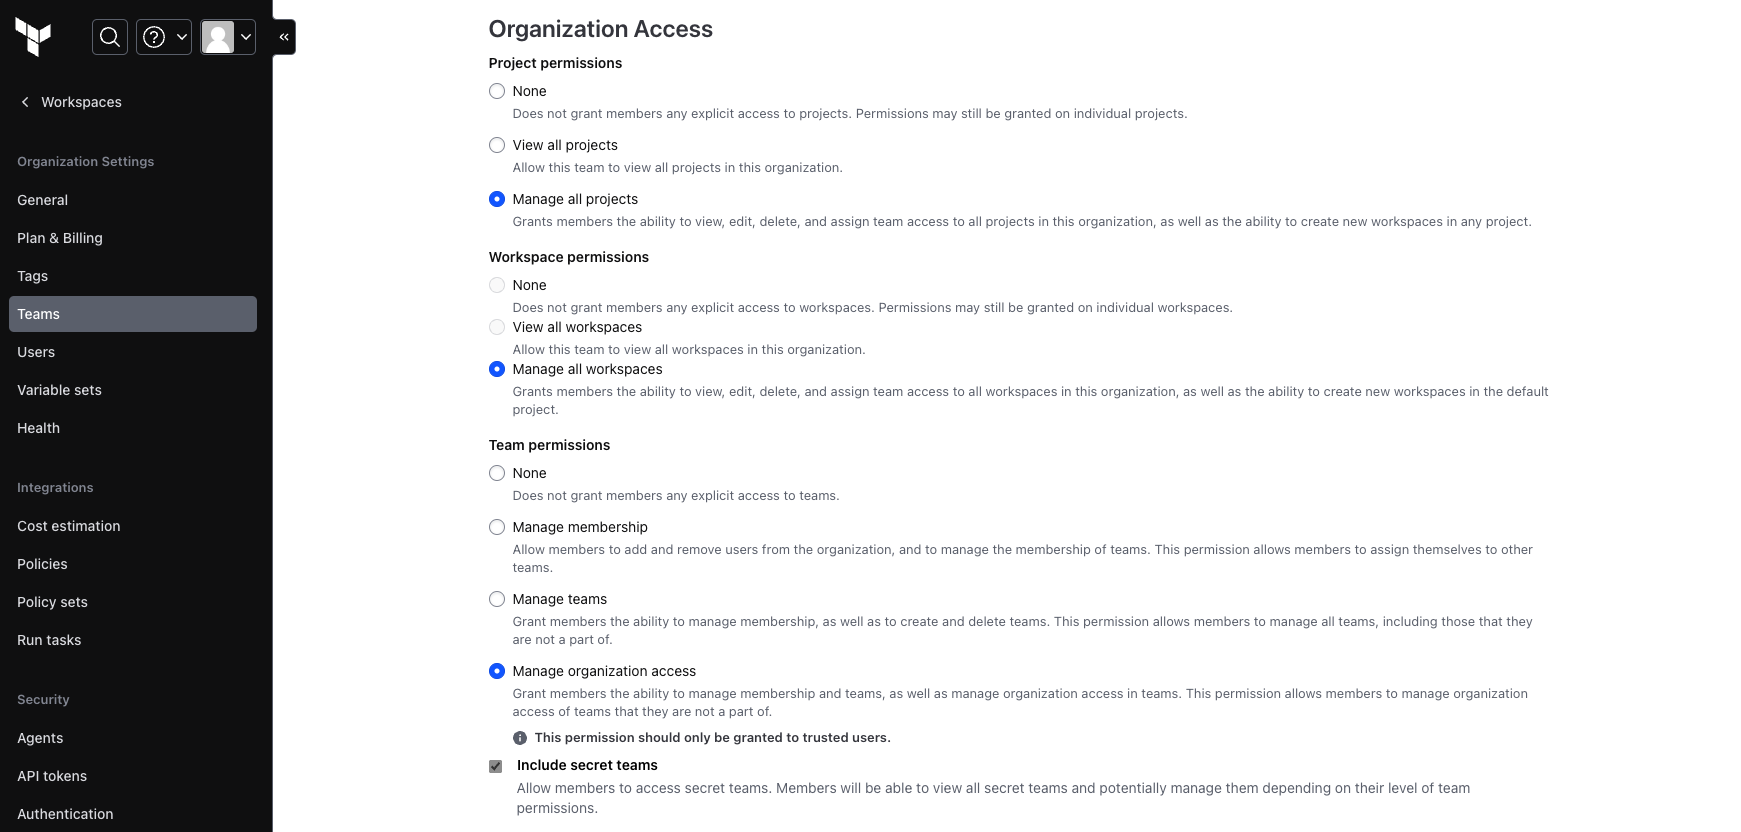 Grant permissions to specific teams to create, read, update, and delete teams.